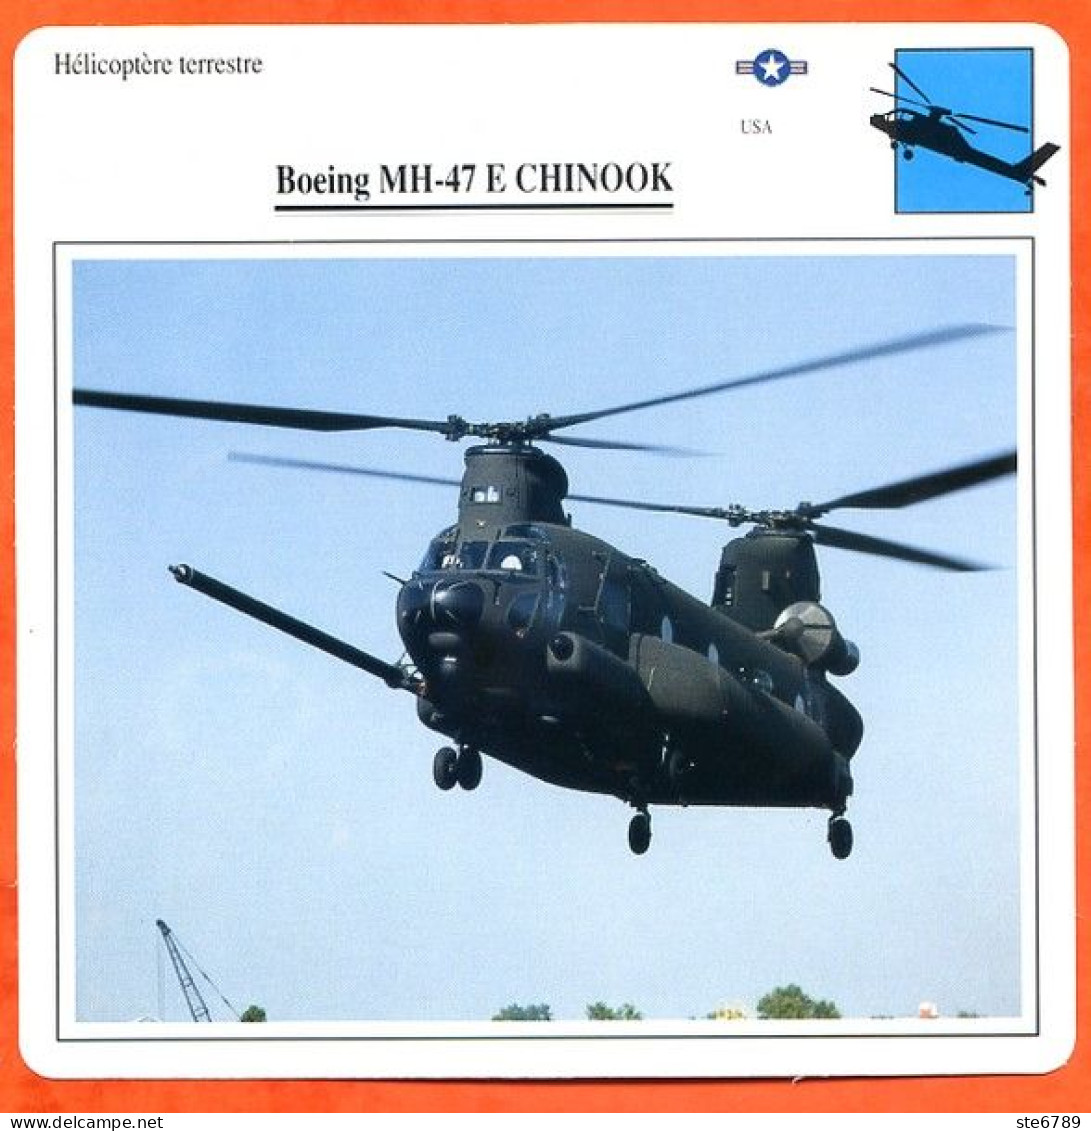 Fiche Aviation Boeing MH 47 E CHINOOK  / Hélicoptère Terrestre USA  Avions - Airplanes